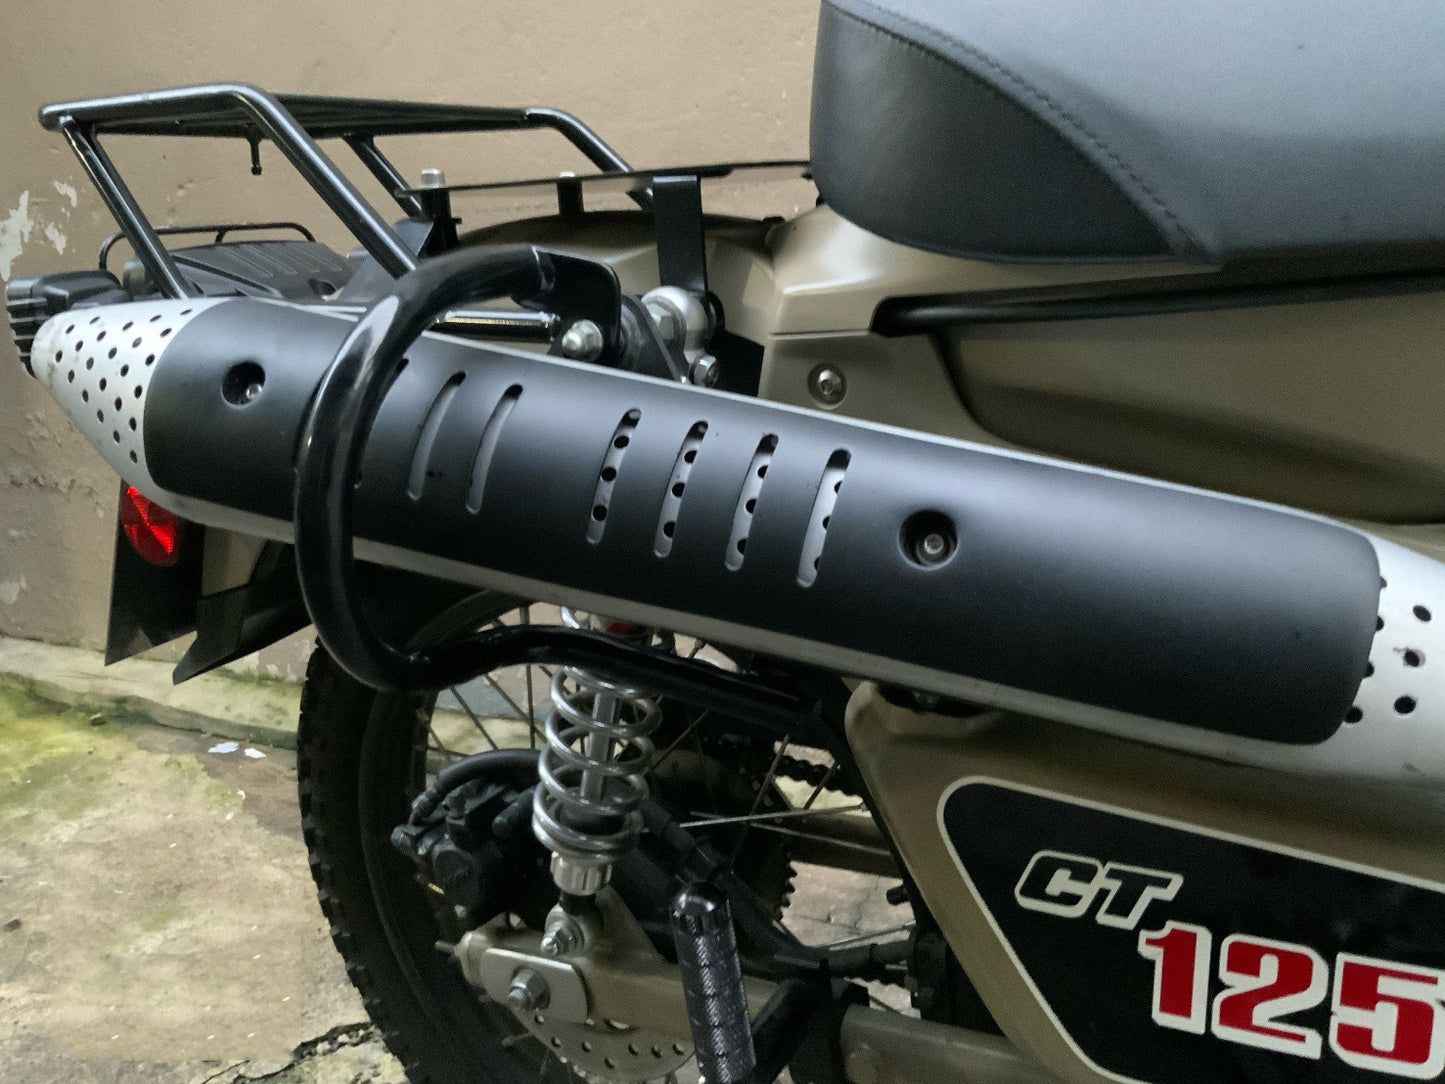 C617 CT125 Exhaust Protect (shipping included)